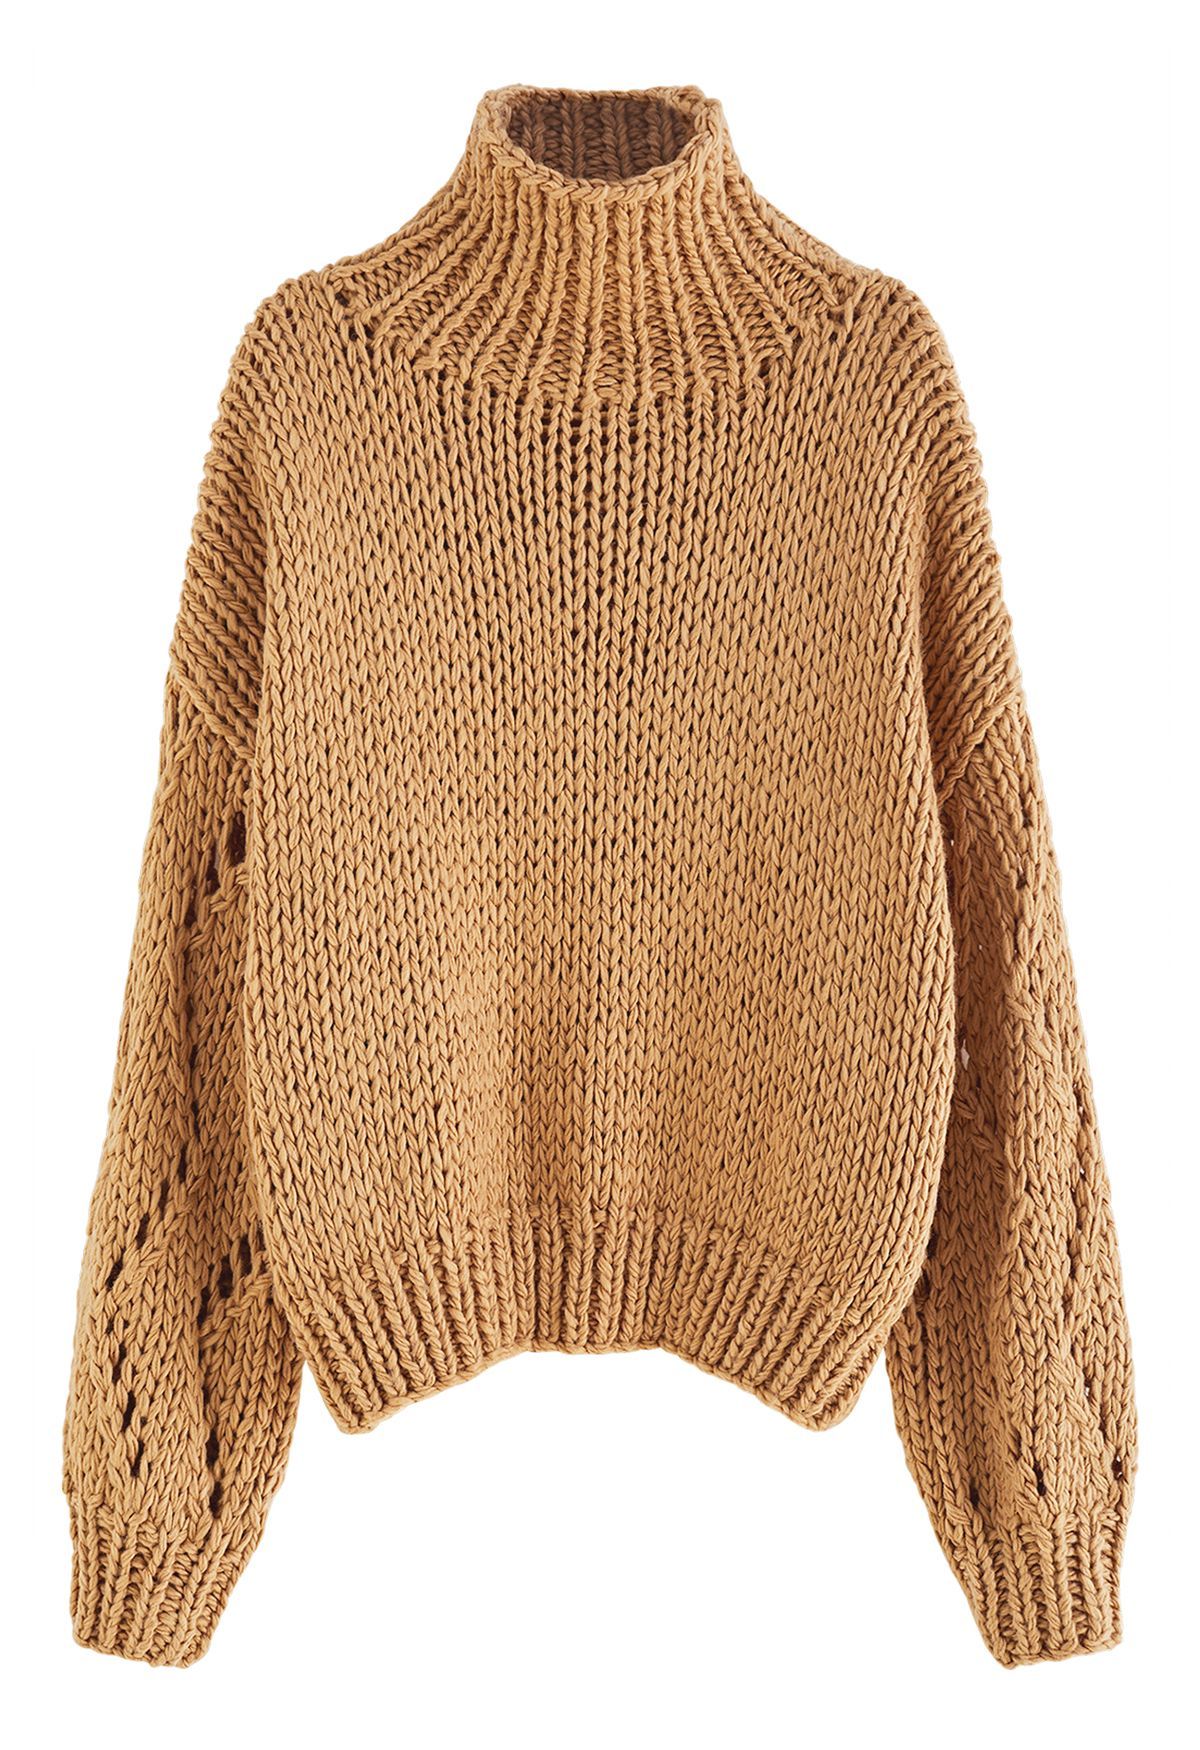 Pointelle Sleeve High Neck Hand-Knit Sweater in Tan | Chicwish